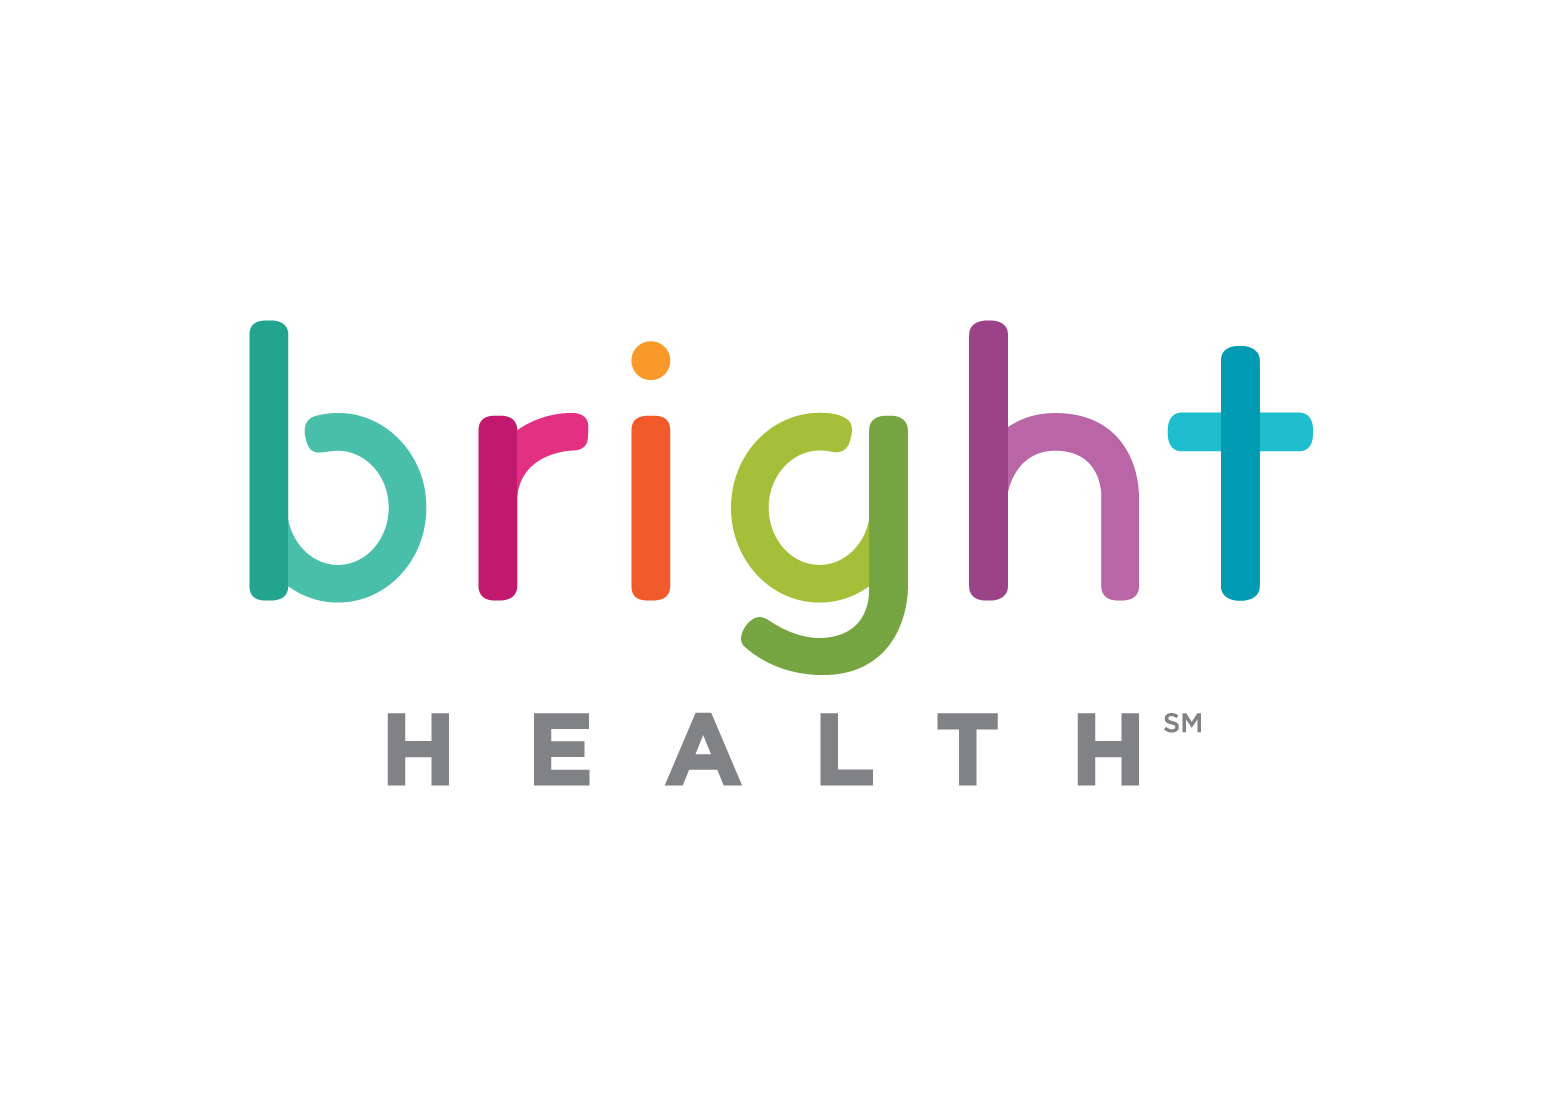 Bright Health Raises 80 Million in Series A Funding Led